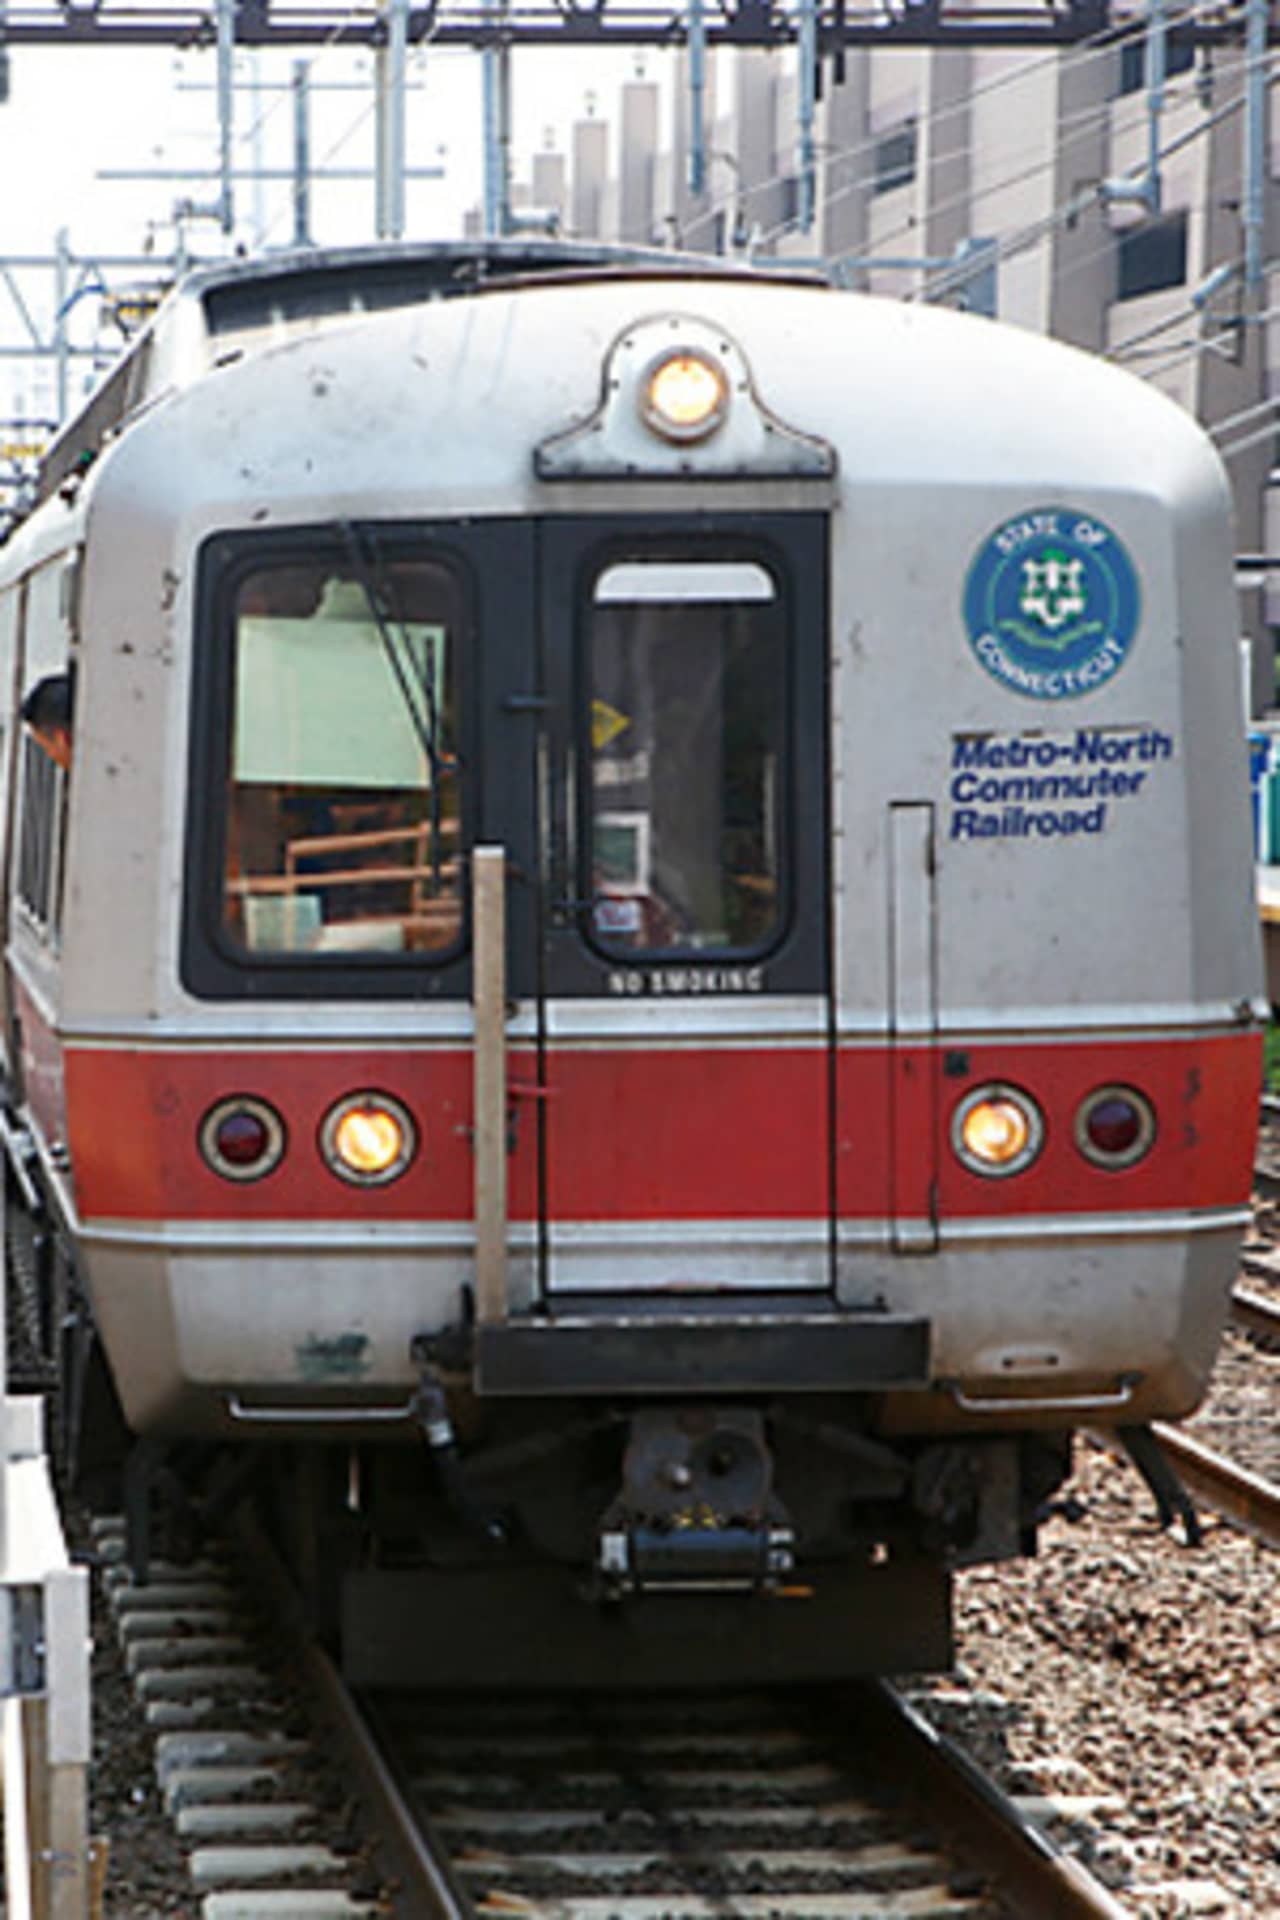 Metro-North trains will be operating on a holiday schedule Labor Day weekend so check your train times carefully.